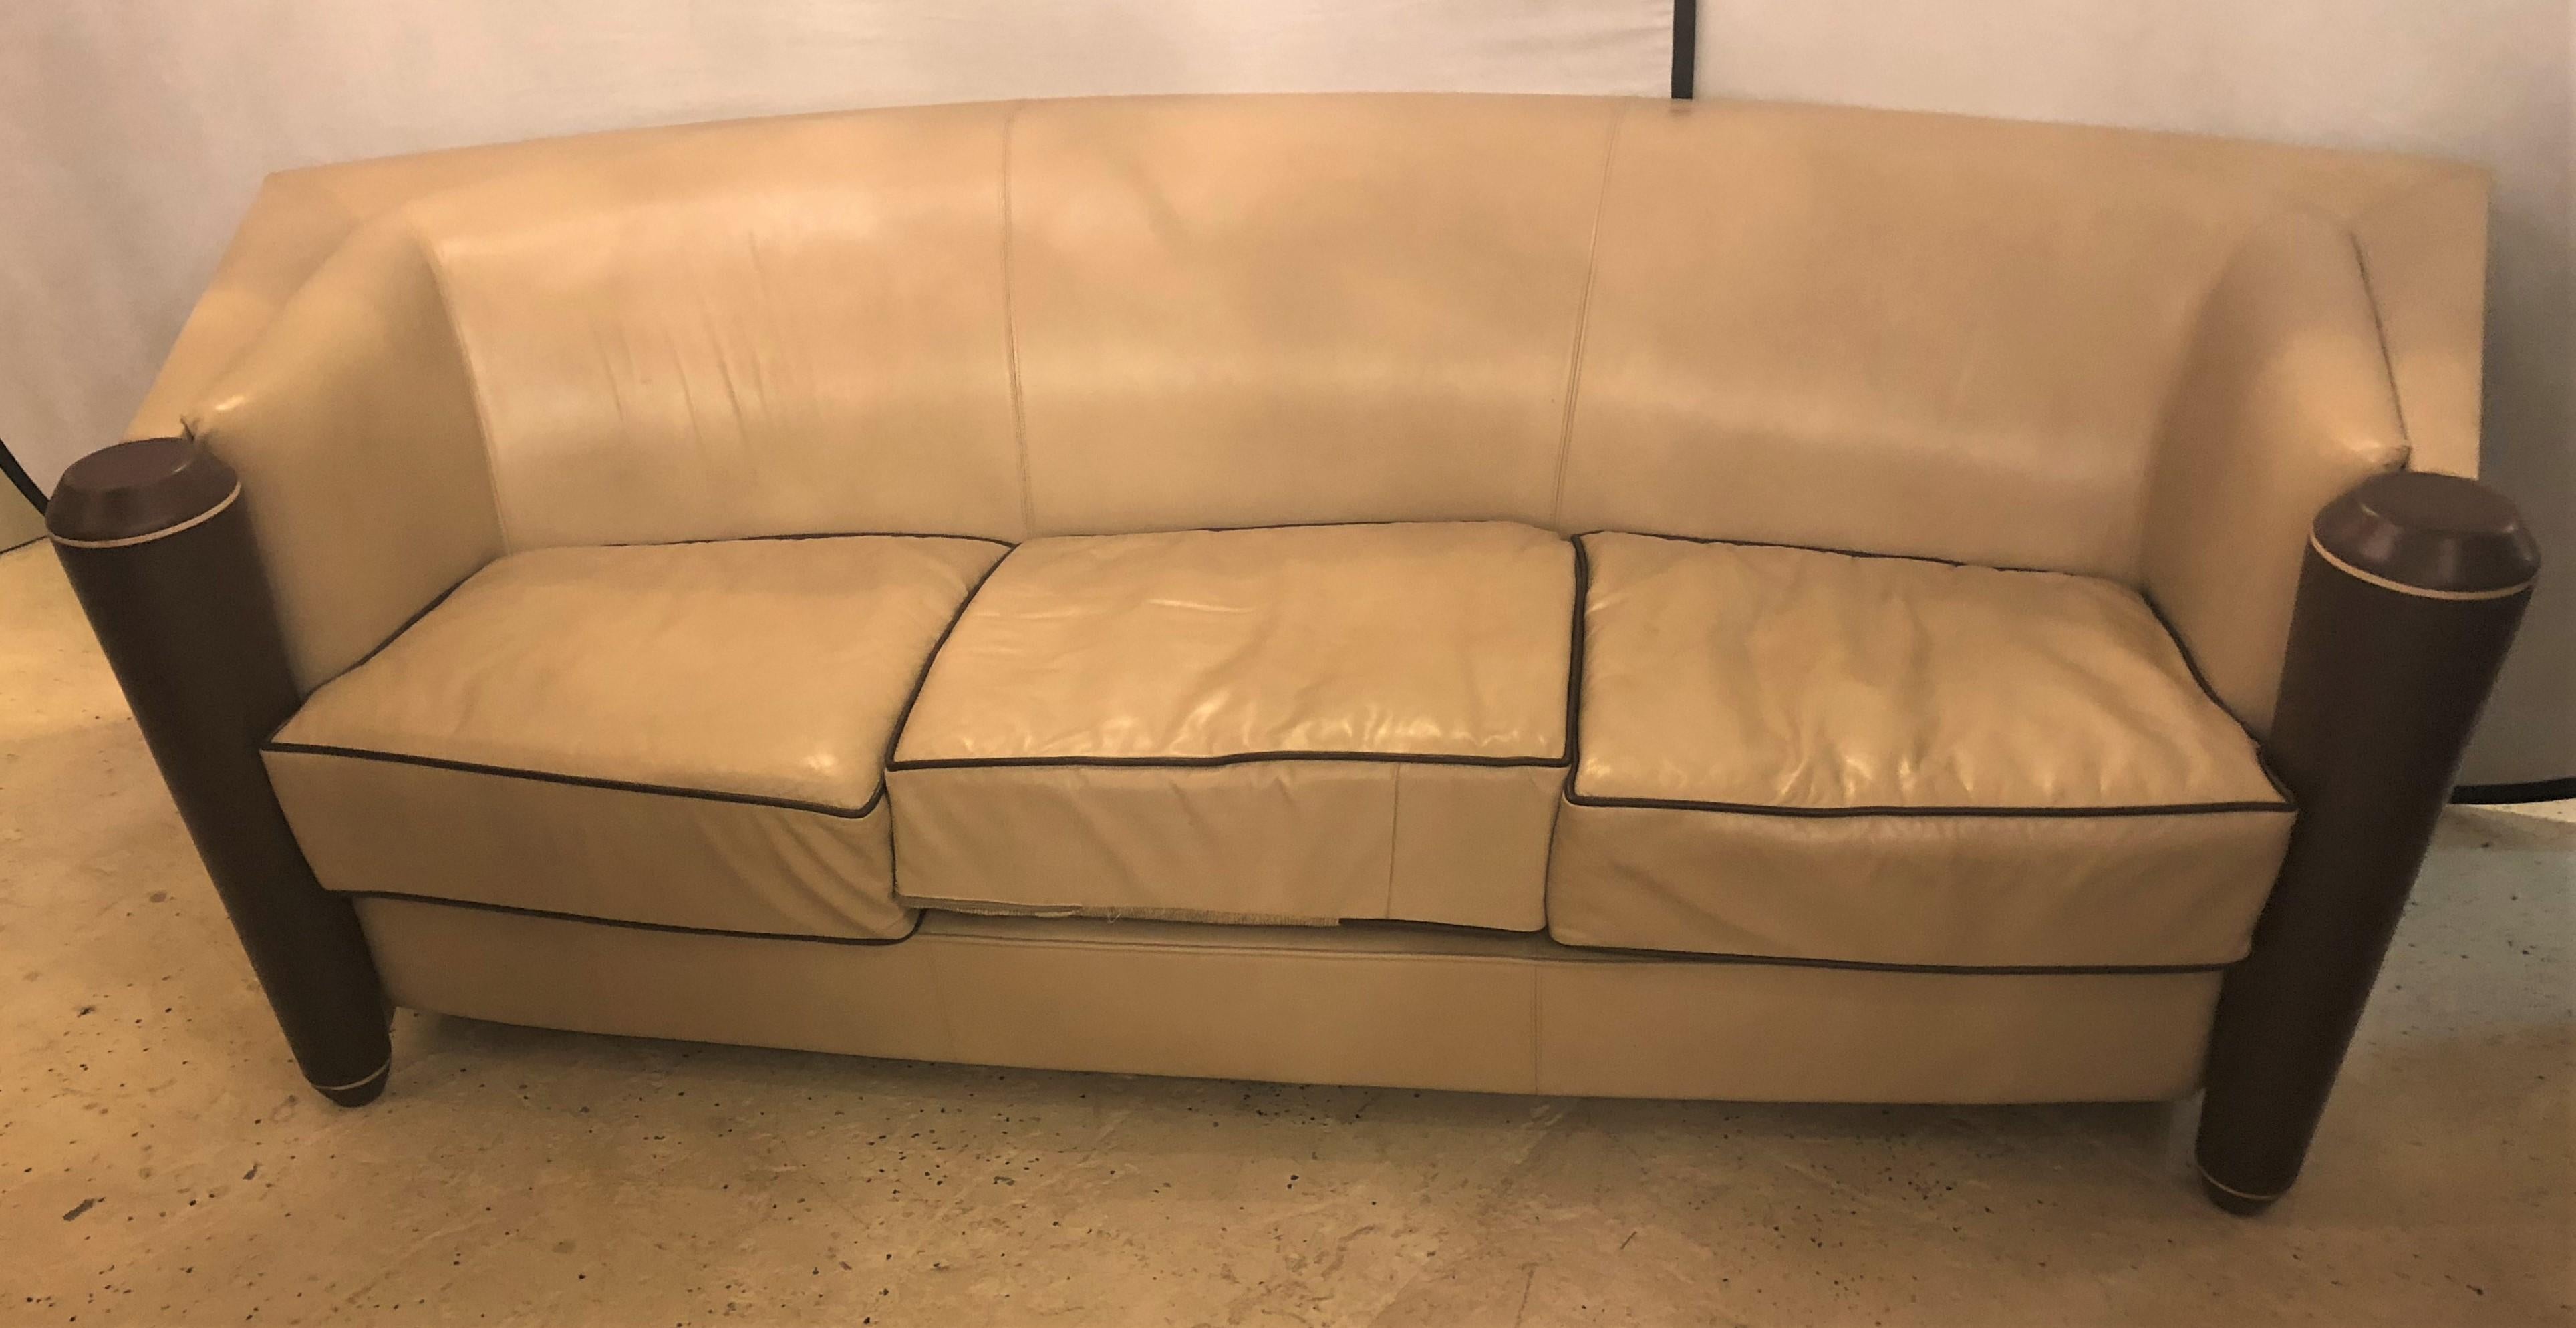 A beautiful three-seat i4 Marnie Sofa designed by Adam Tihany for the Pace Collection, Mariani Furniture. This sofa features a burr-elm back and tan leather upholstery with leather covered column-form sides. The frame is done in solid poplar and